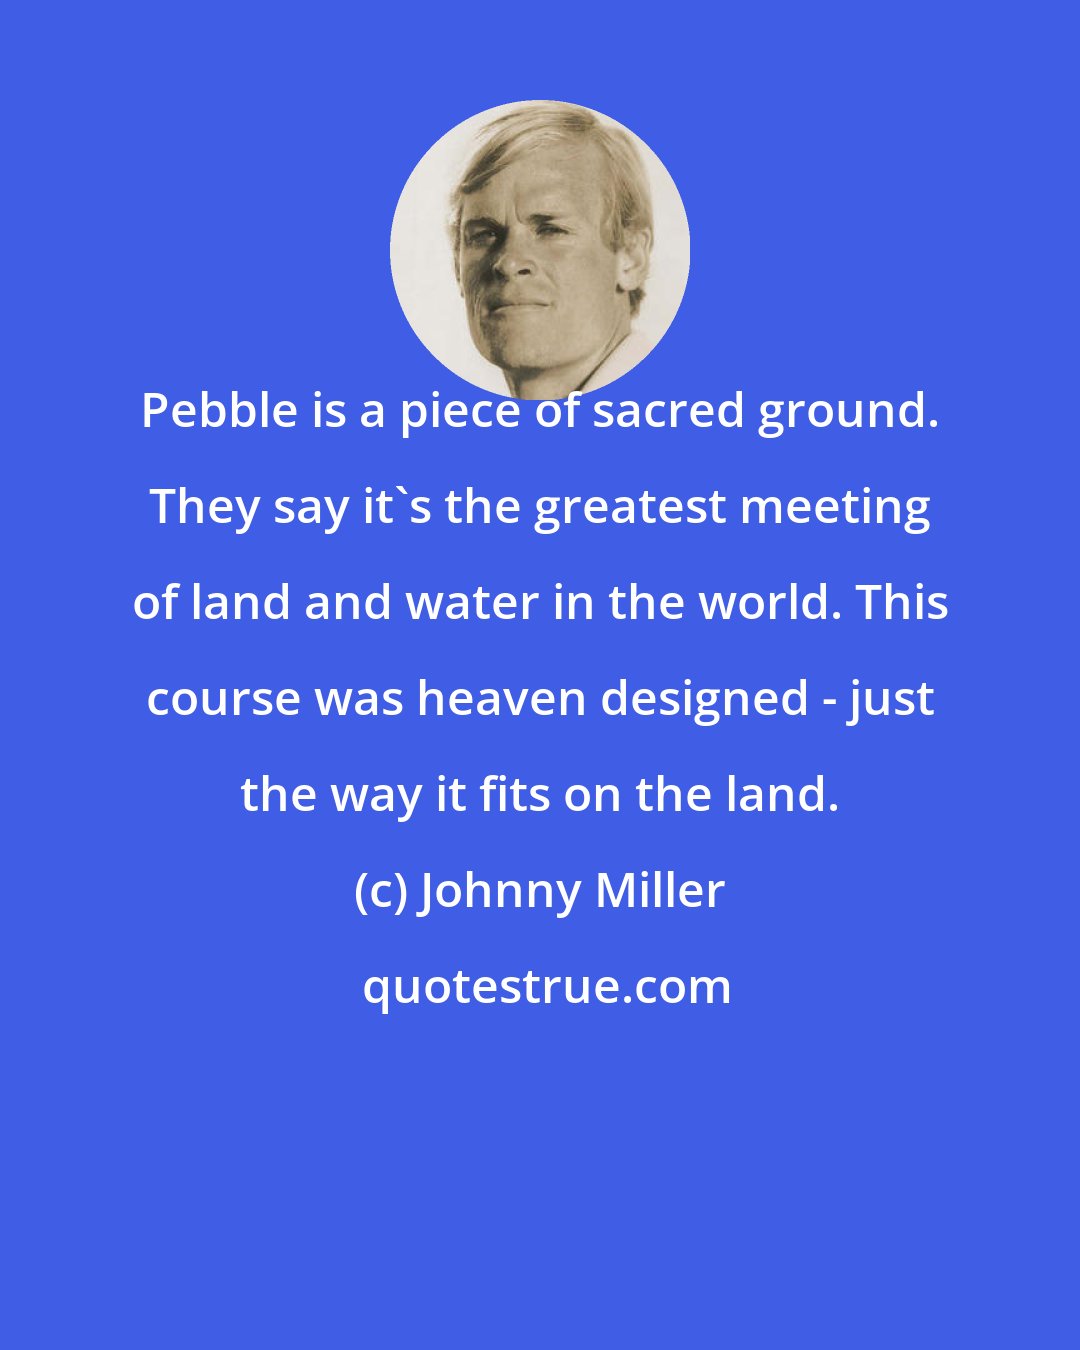 Johnny Miller: Pebble is a piece of sacred ground. They say it's the greatest meeting of land and water in the world. This course was heaven designed - just the way it fits on the land.